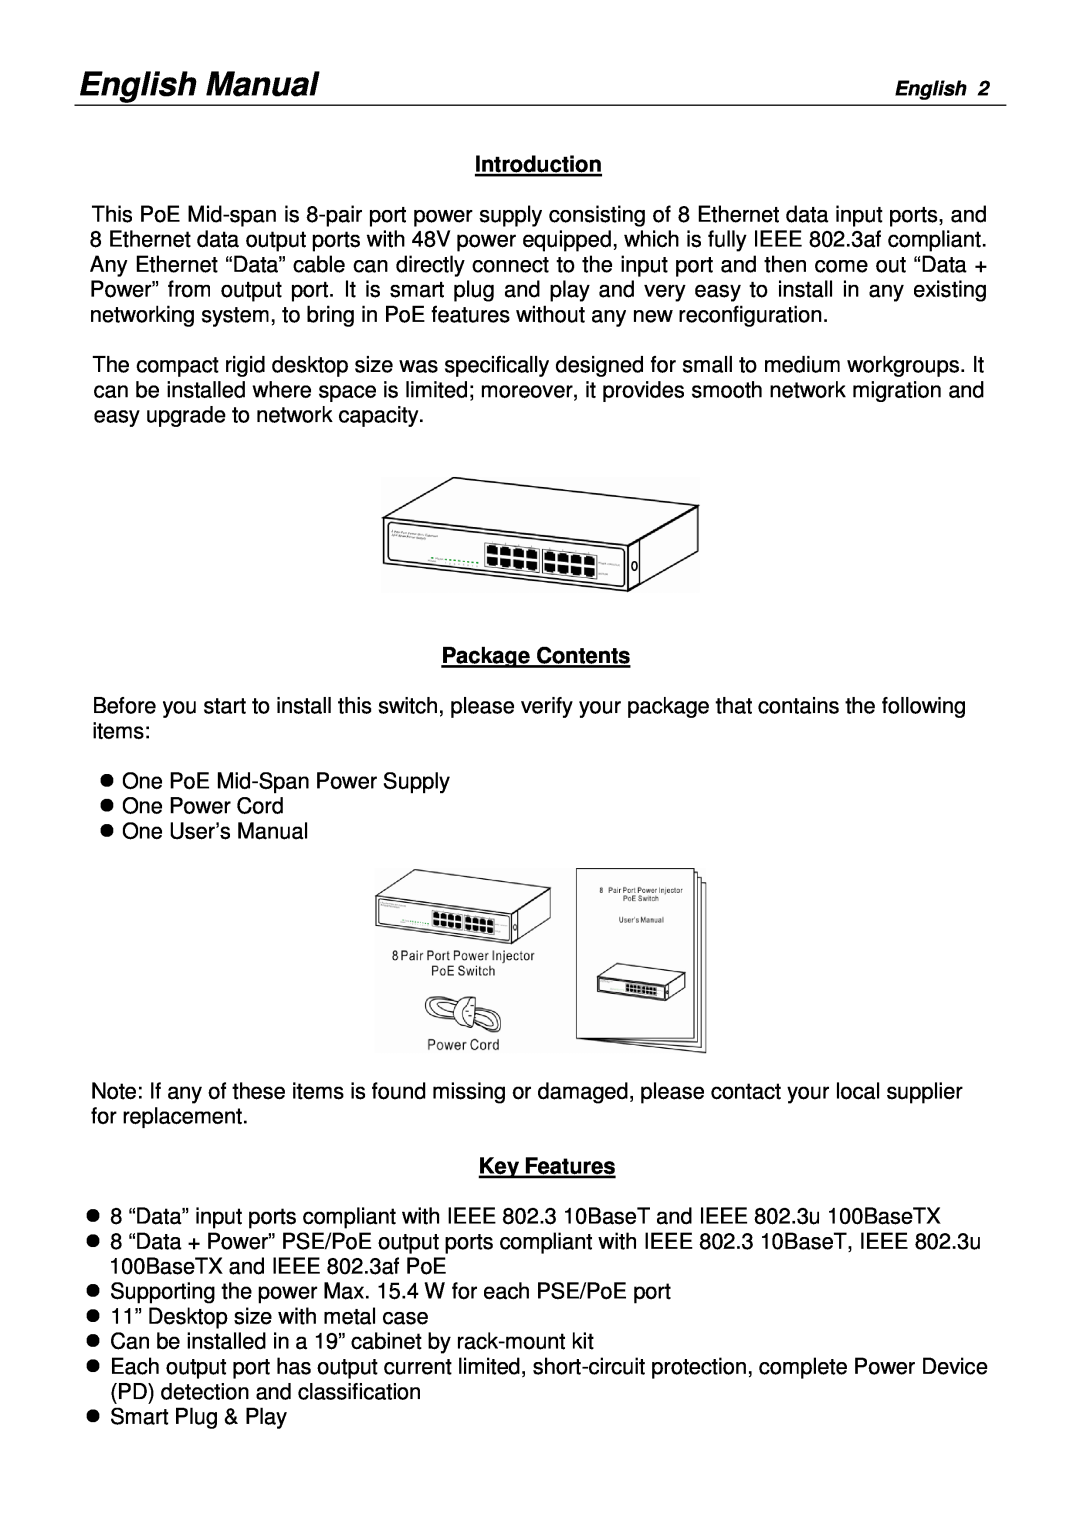 Lindy 25058 user manual English Manual, Introduction, Package Contents, Key Features 